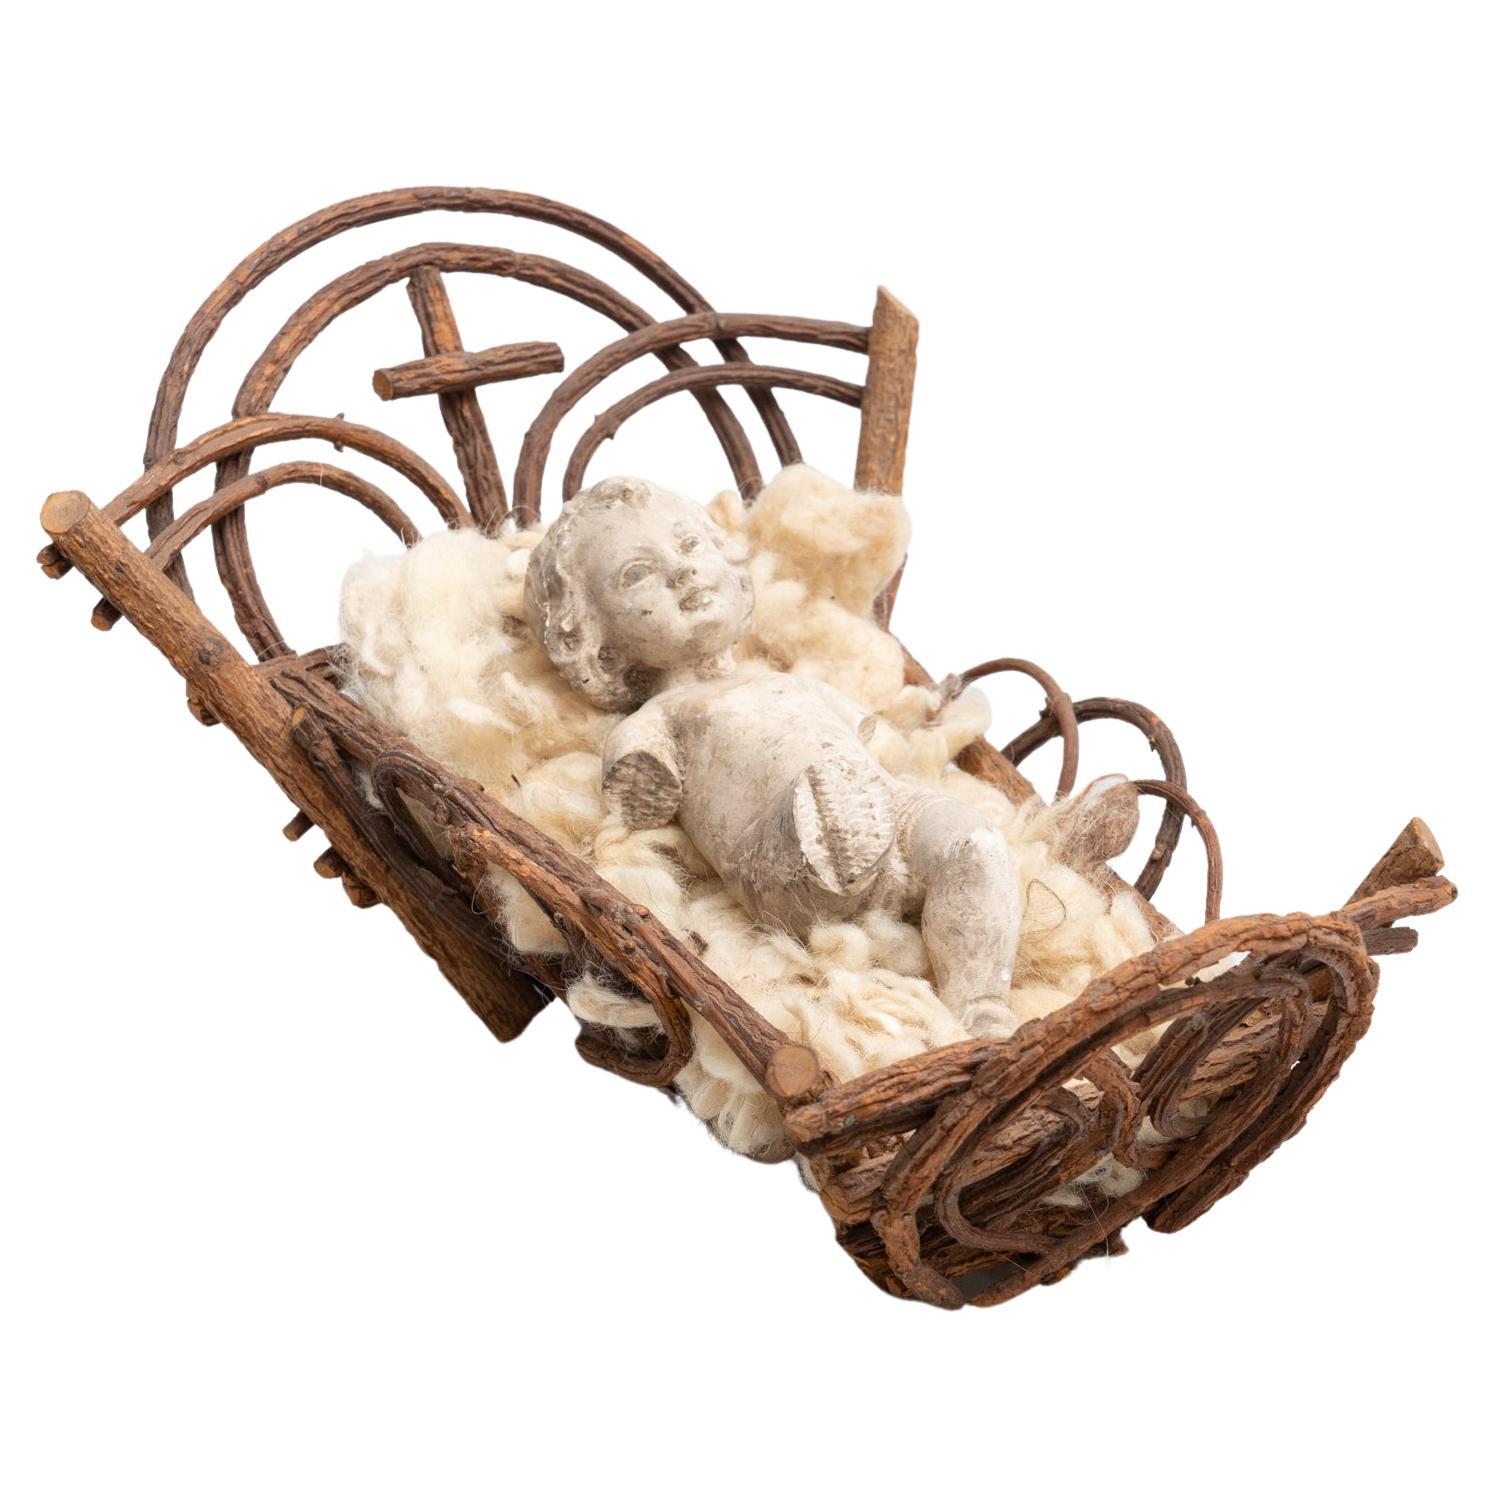 Mid-20th century hand painted baby Jesus figure made of plaster in the cradle.
Made in Barcelona, Spain.

In original condition, with minor wear consistent with age and use, preserving a beautiful patina.

Materials:
Plaster.
Wood.
 